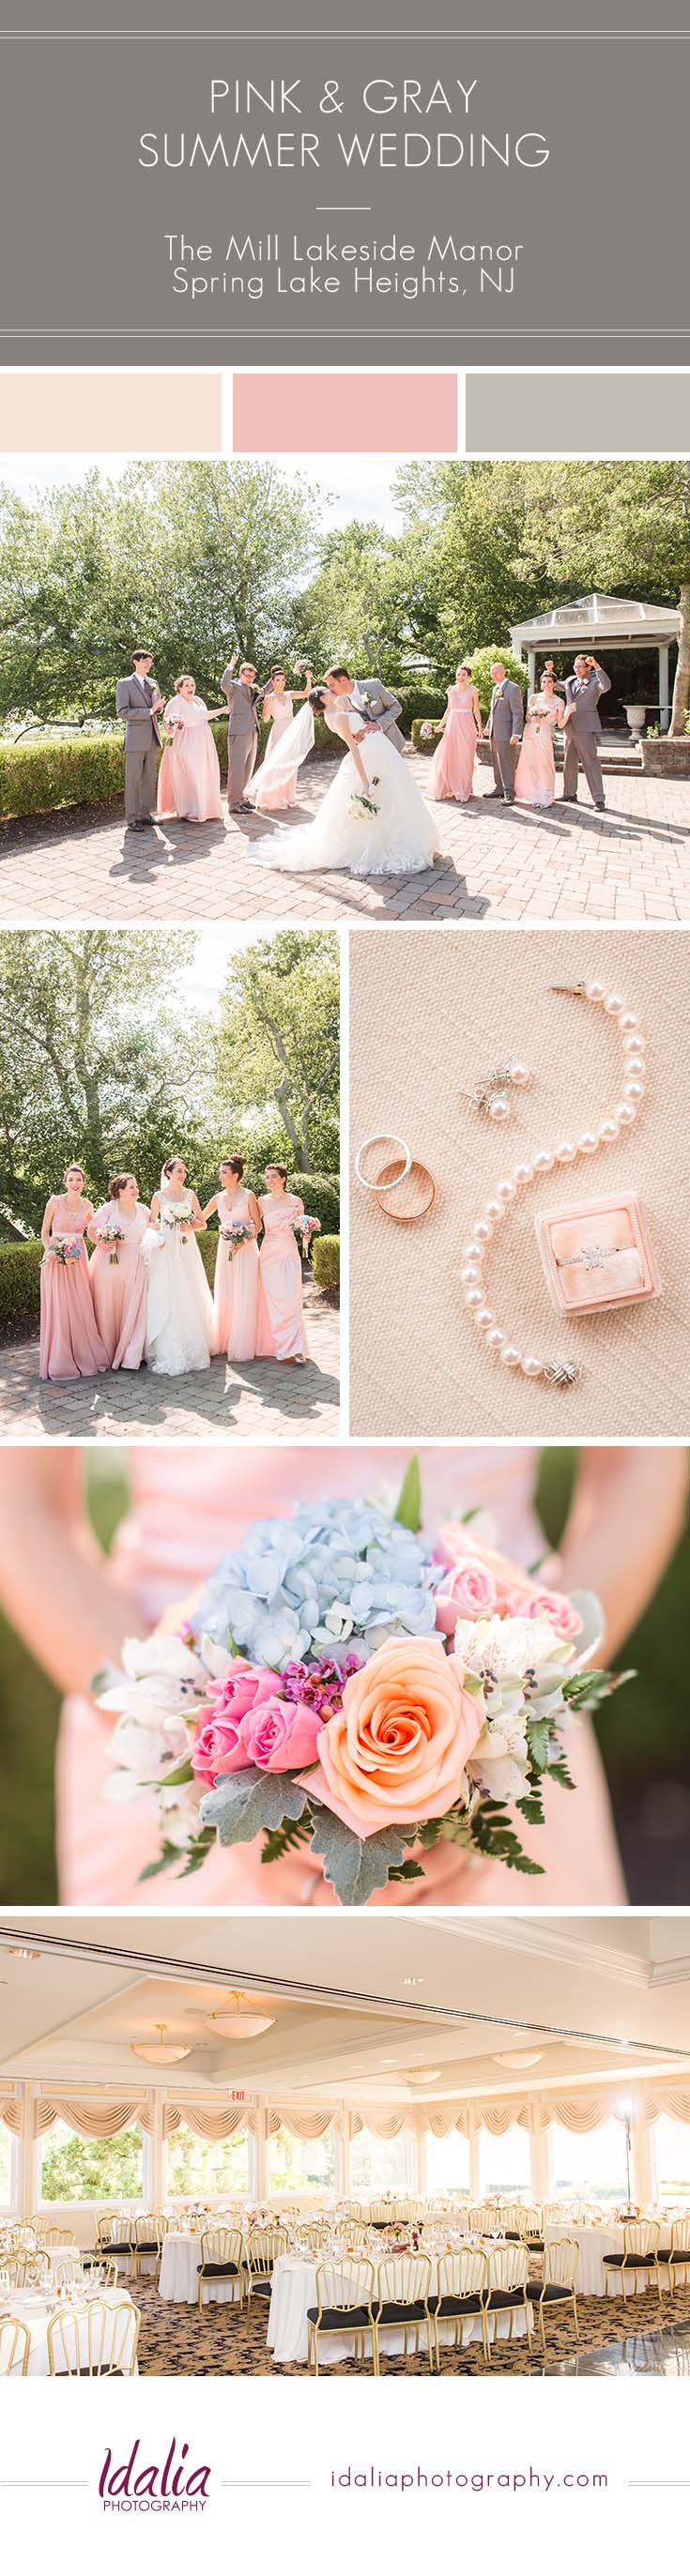 Wedding at The Mill Lakeside Manor | Spring Lake Heights, NJ